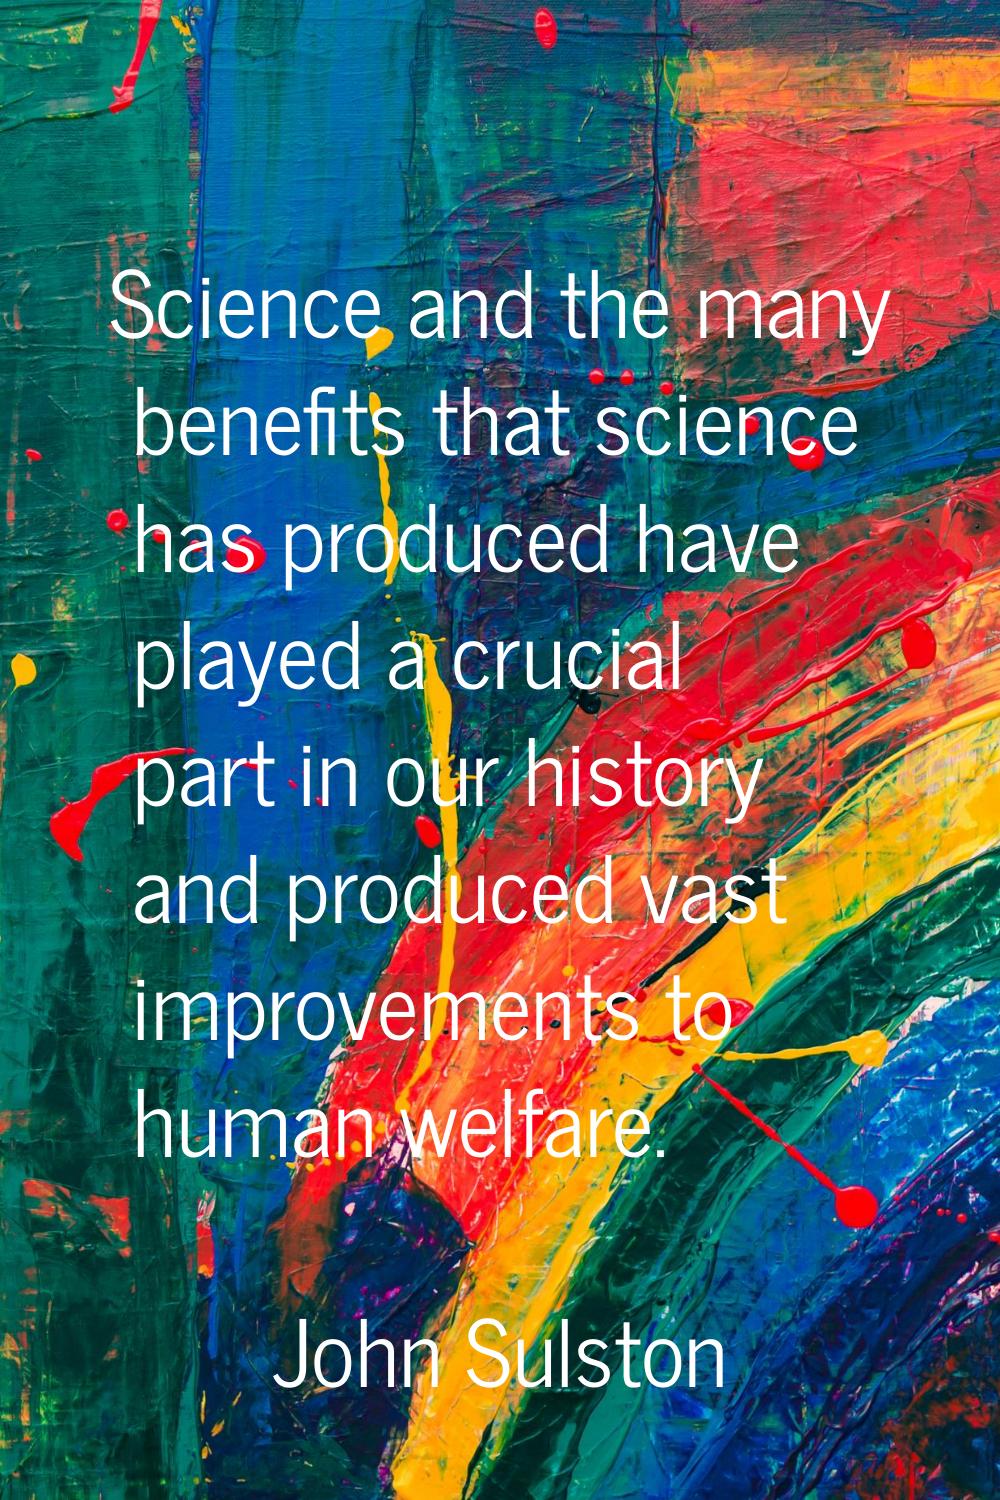 Science and the many benefits that science has produced have played a crucial part in our history a